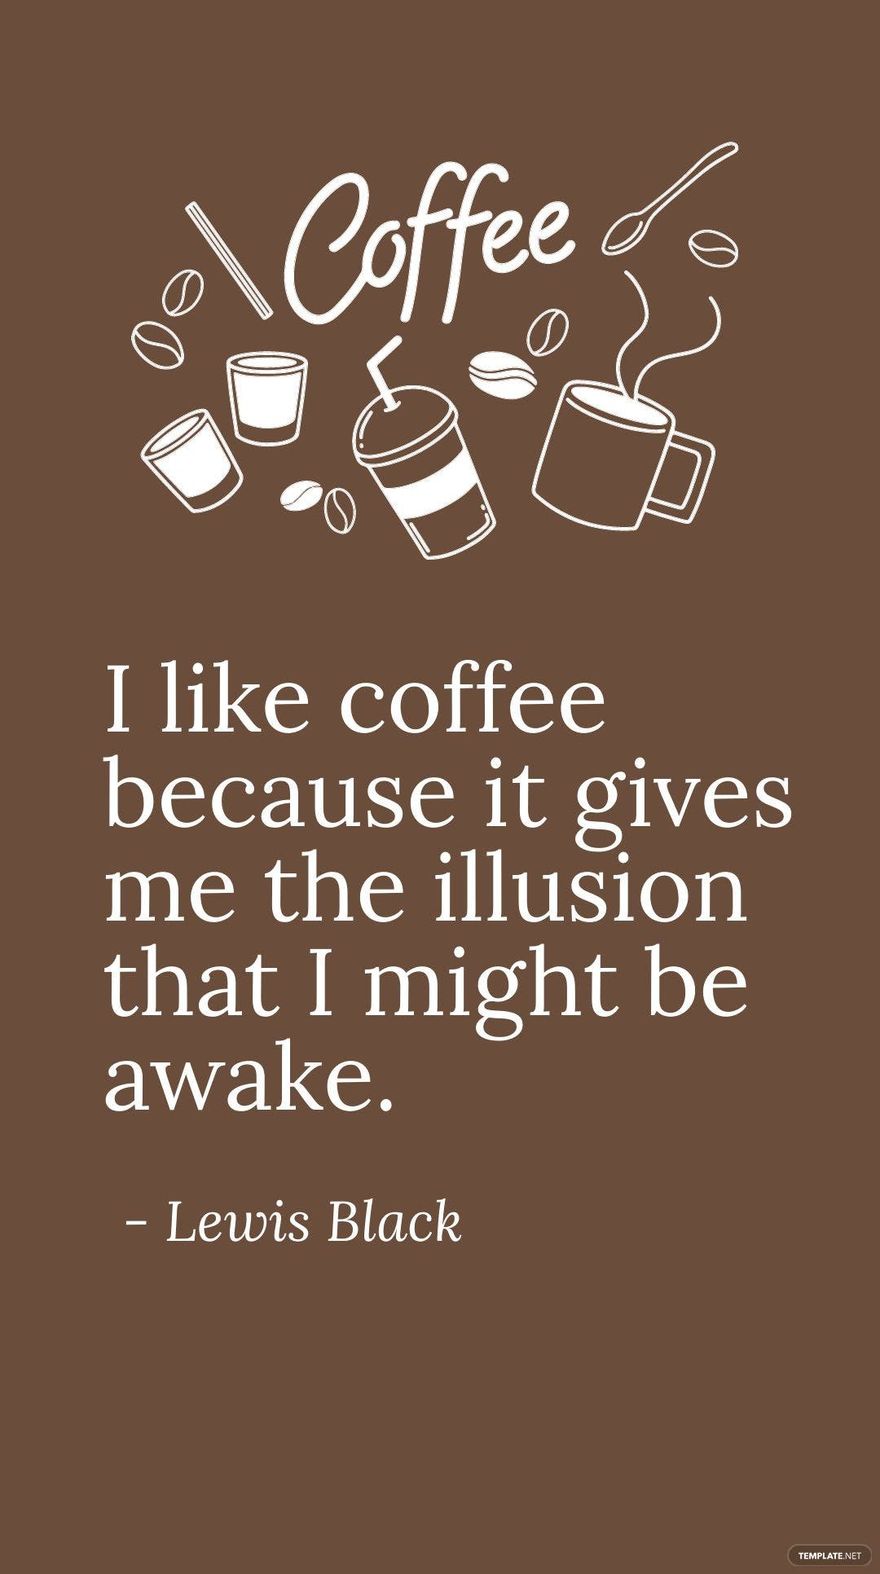 Free Lewis Black- I like coffee because it gives me the illusion that I might be awake.